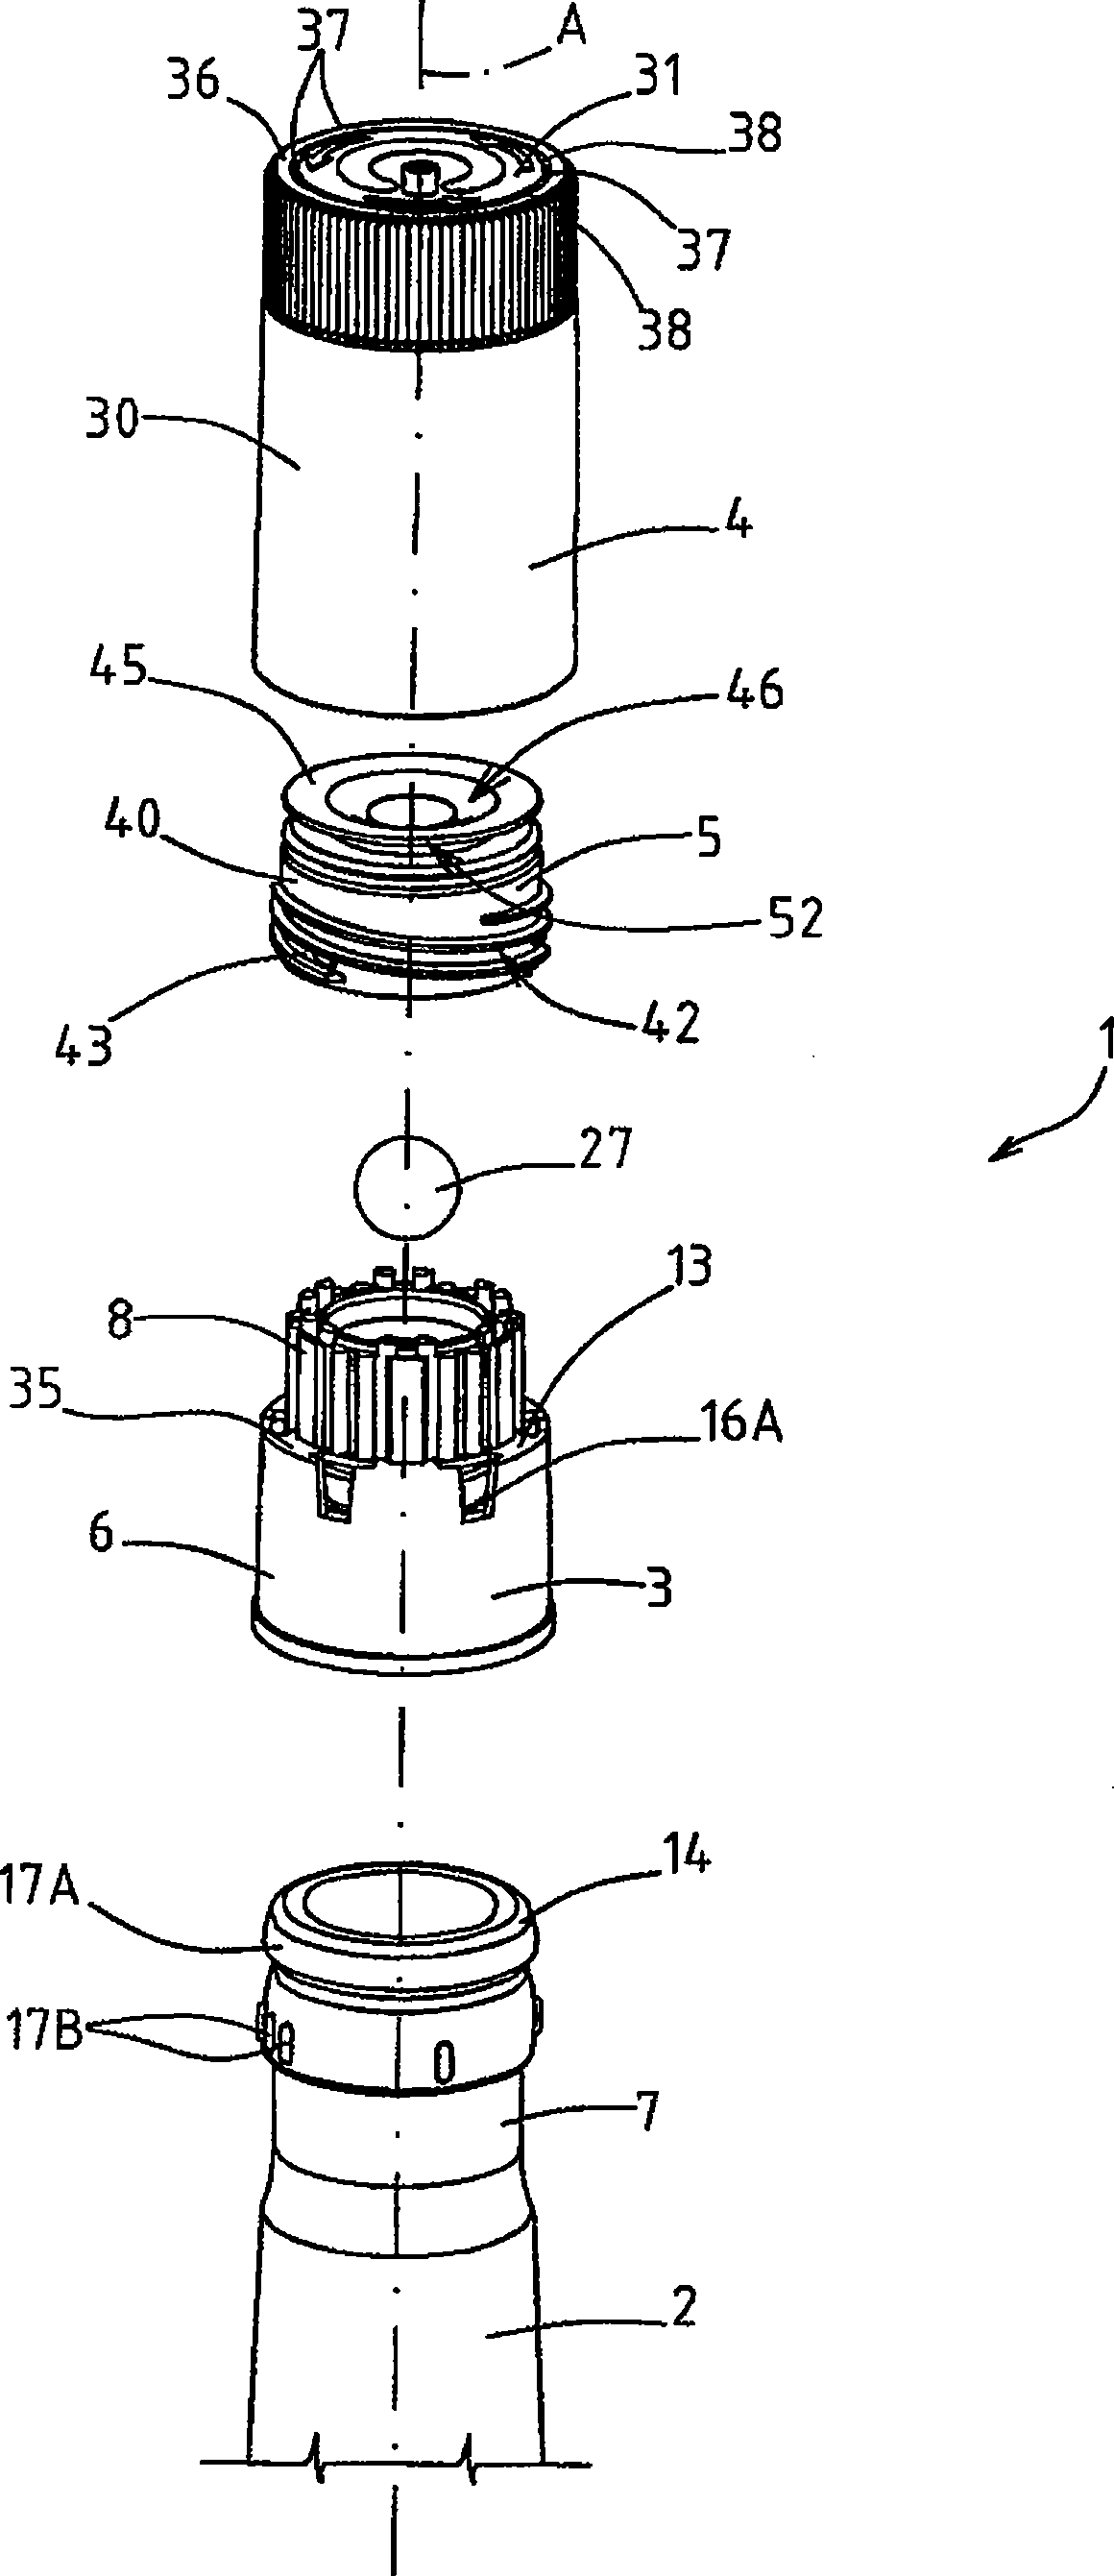 Distributor capping apparatus for bottles